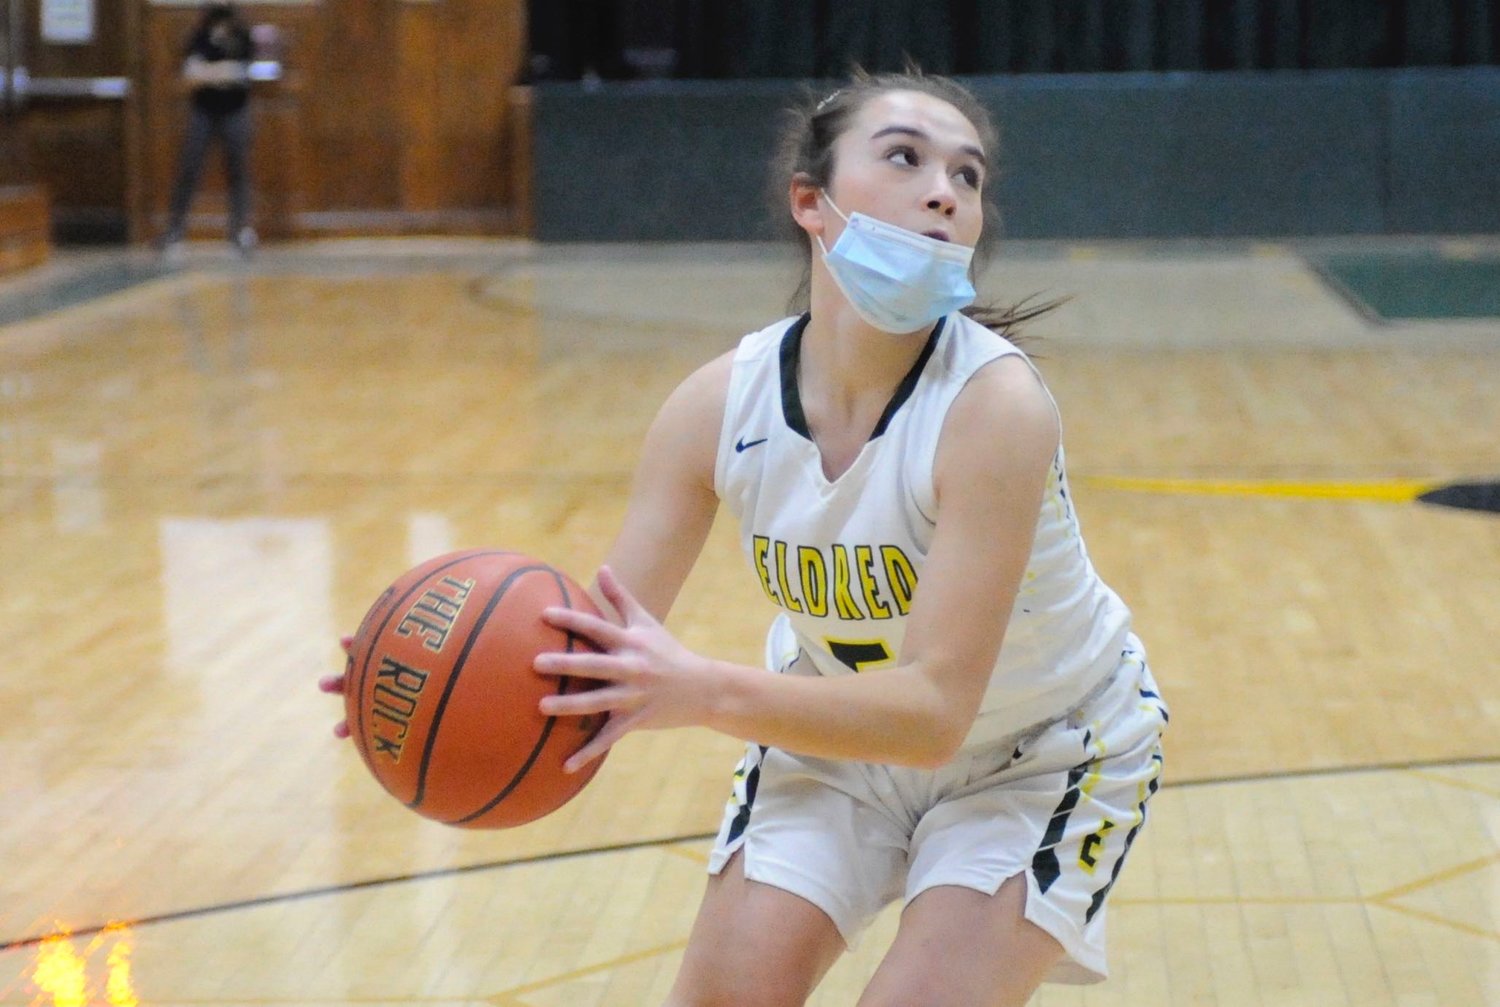 Eyes on the glass. Eldred’s Jaelyn Labuda posted 5 points.